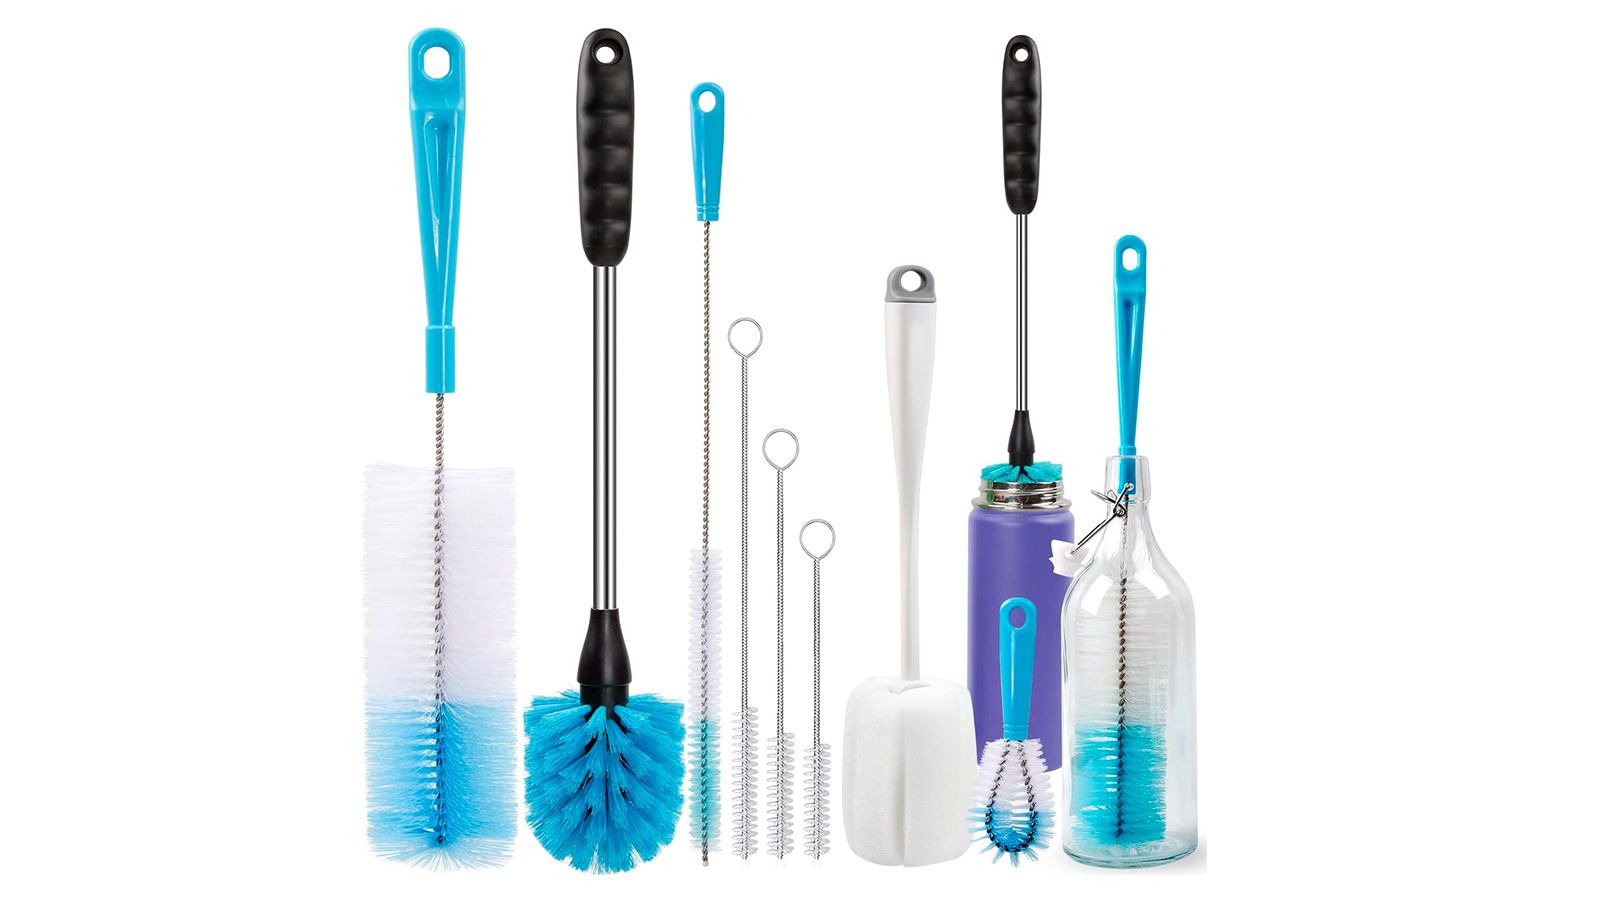 OXO Good Grips Kitchen Appliance Cleaning Set with Deep Clean Brush Bundle